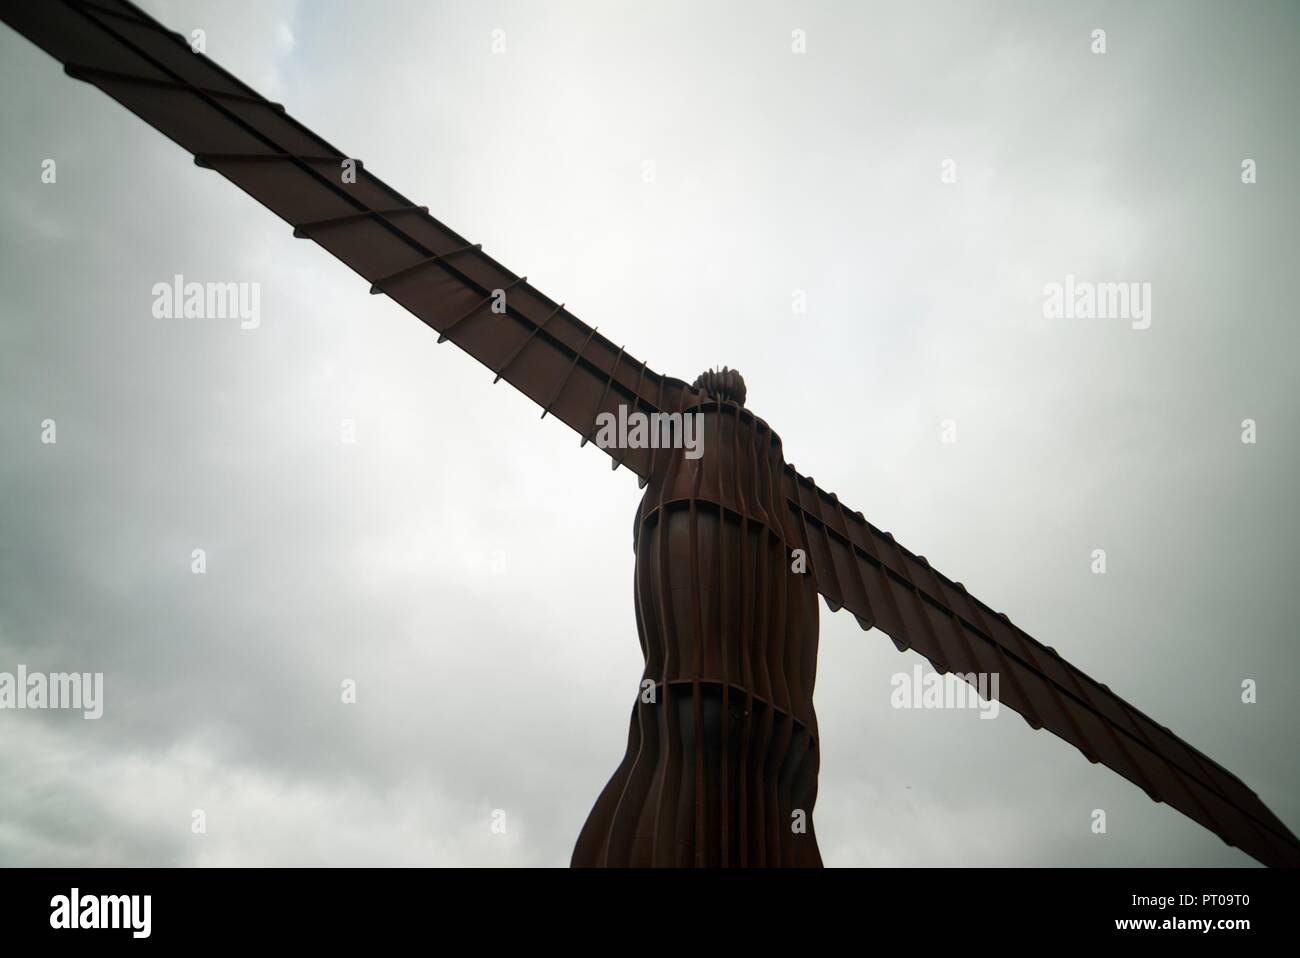 The view looking up at the Angel of the North statue/sculpture in Tyneside, near Newcastle. The famous landmark in England. Stock Photo